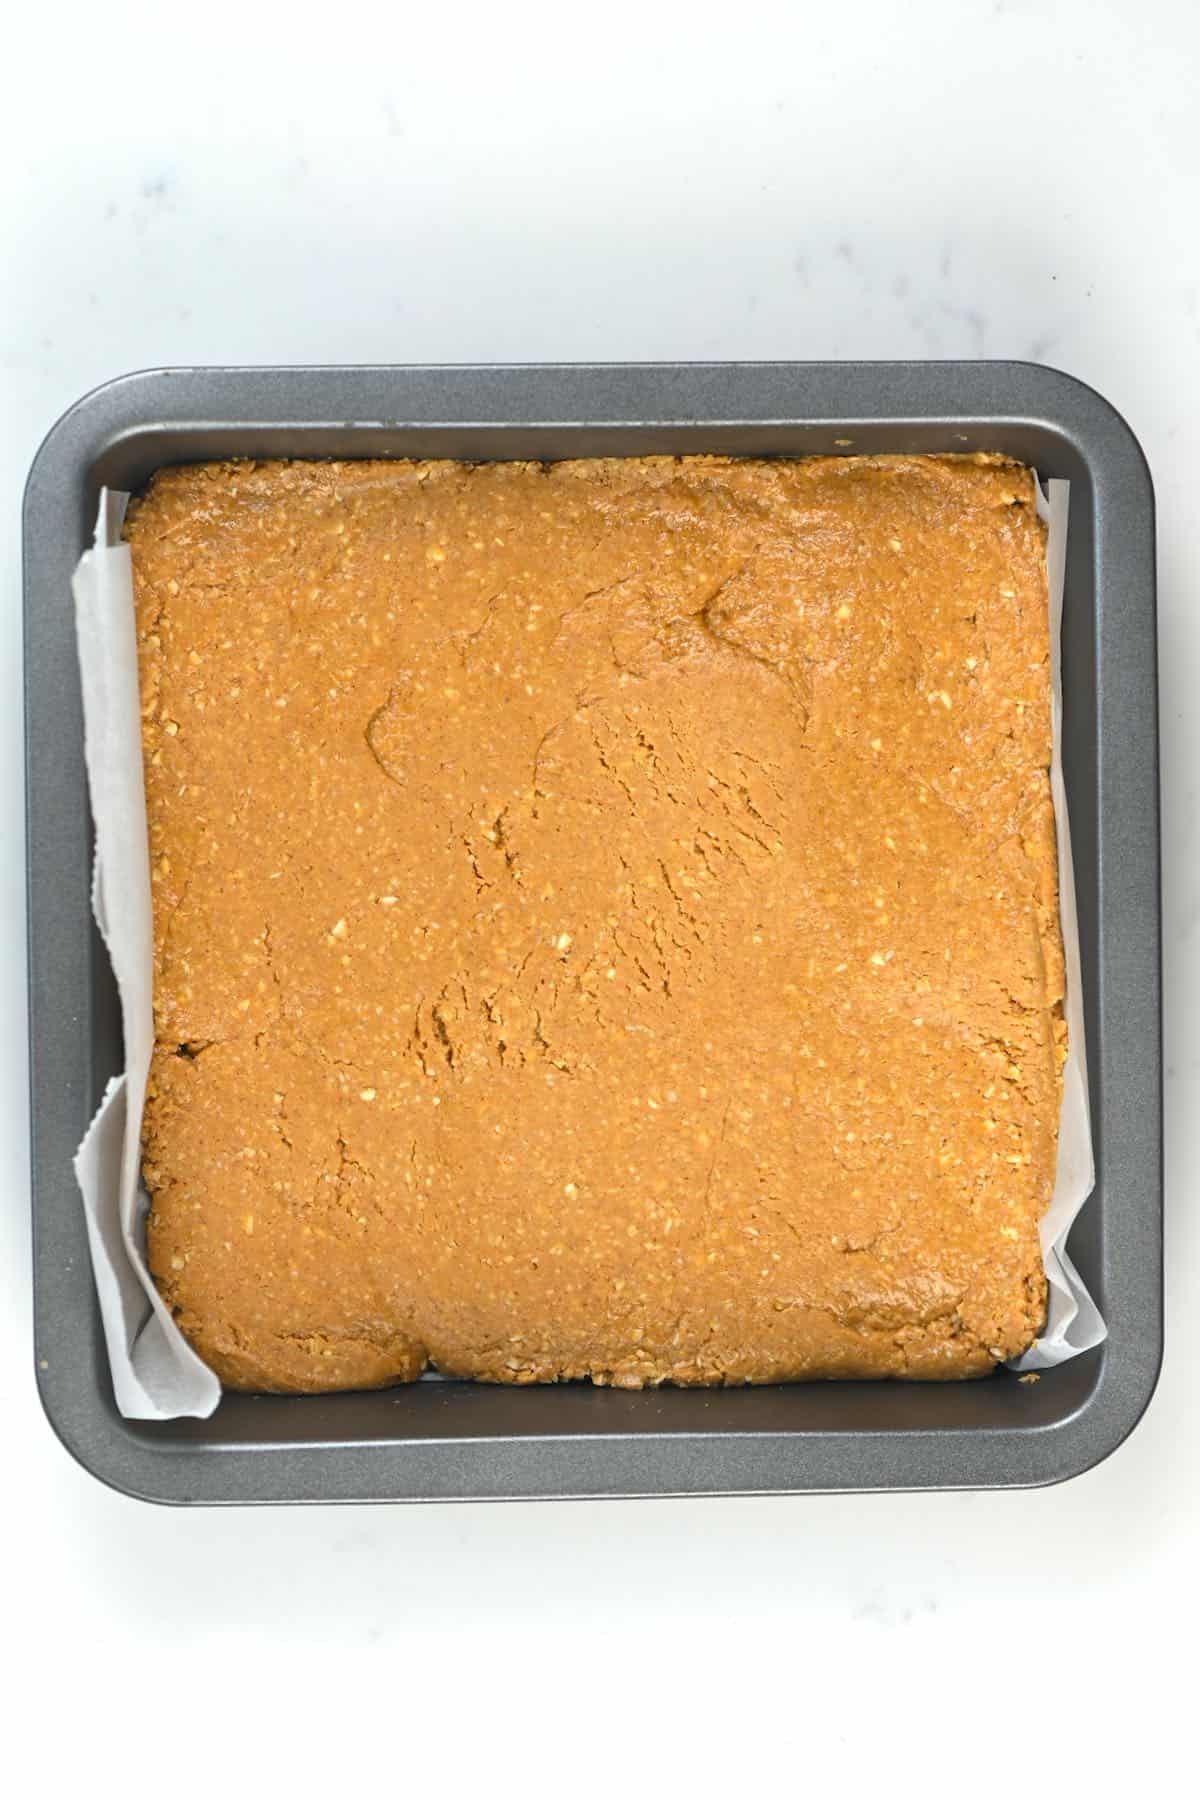 Peanut butter bar mixture spread in a tin tray